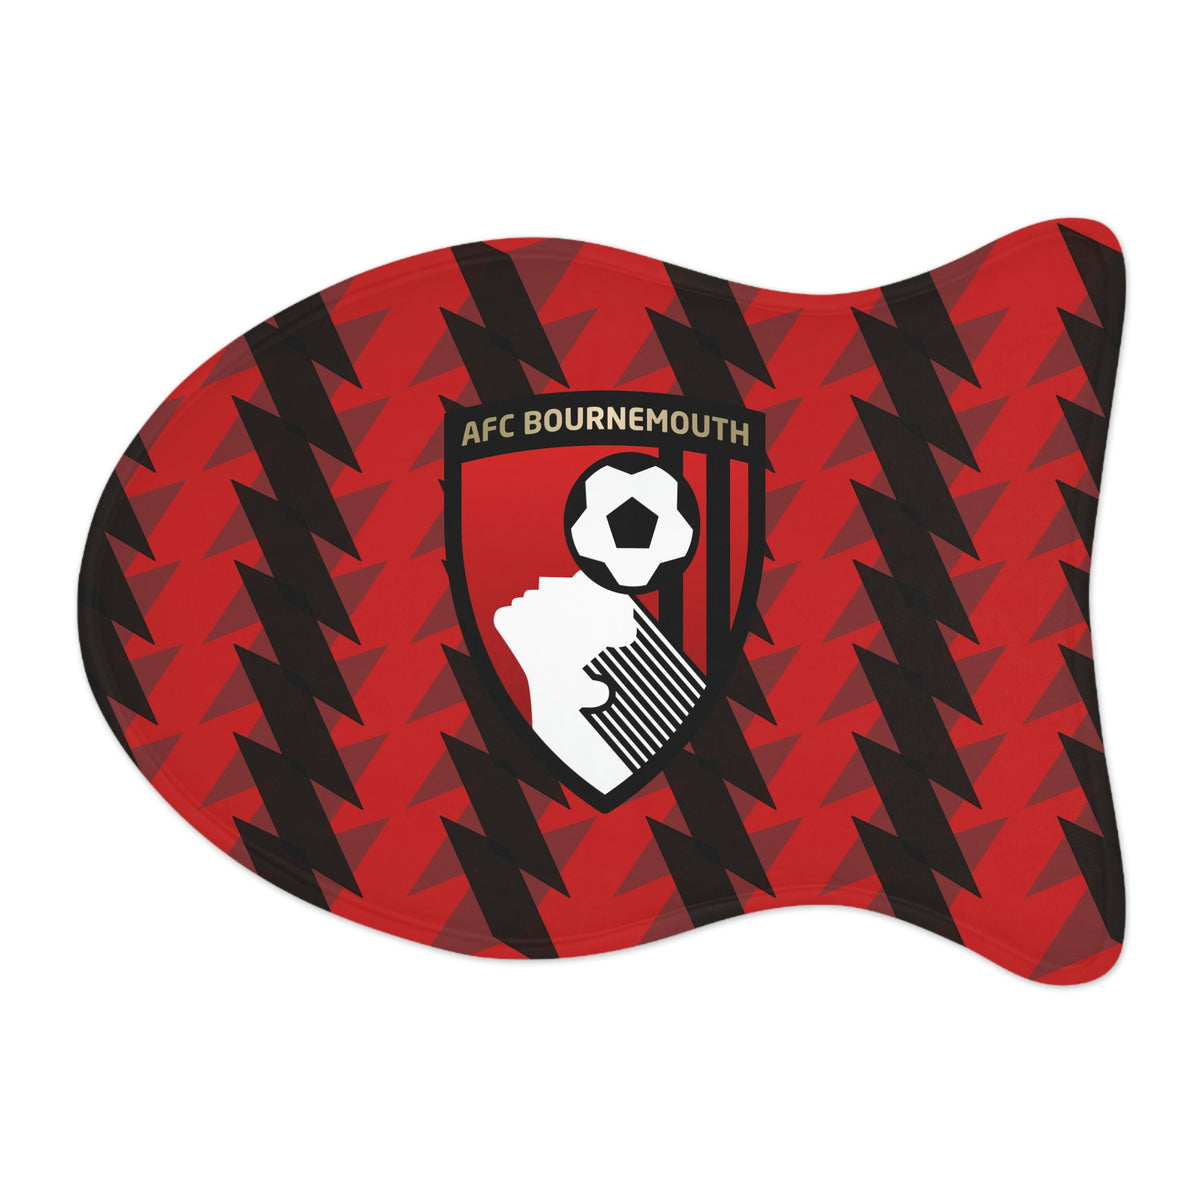 AFC Bournemouth 23 Home Inspired Fish-shaped Feeding Mats - 3 Red Rovers